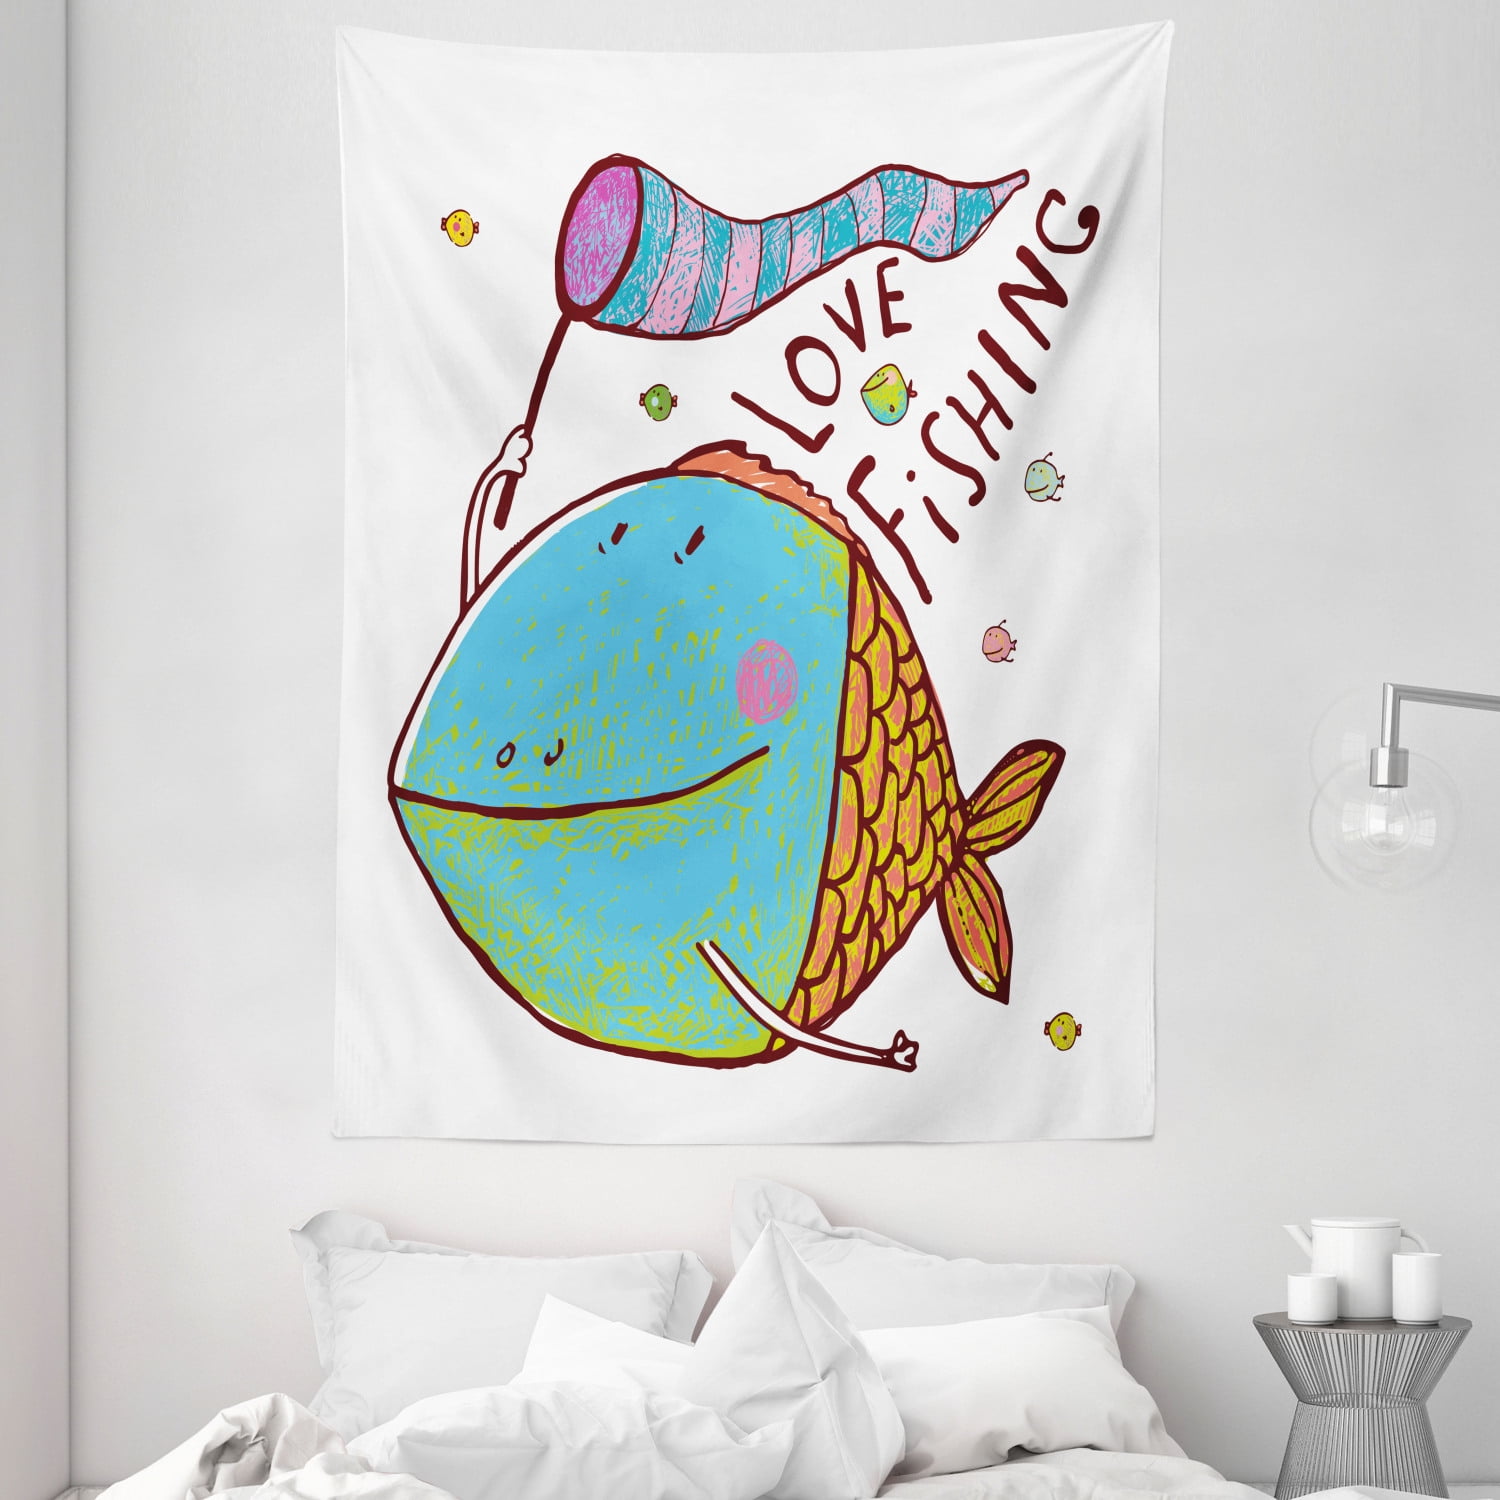 Fishing Tapestry, Kids Cute Large Fat Fish Holding a Flag with Love Quote  Humor Fun Nursery Theme, Wall Hanging for Bedroom Living Room Dorm Decor,  60W X 80L Inches, Multicolor, by Ambesonne 